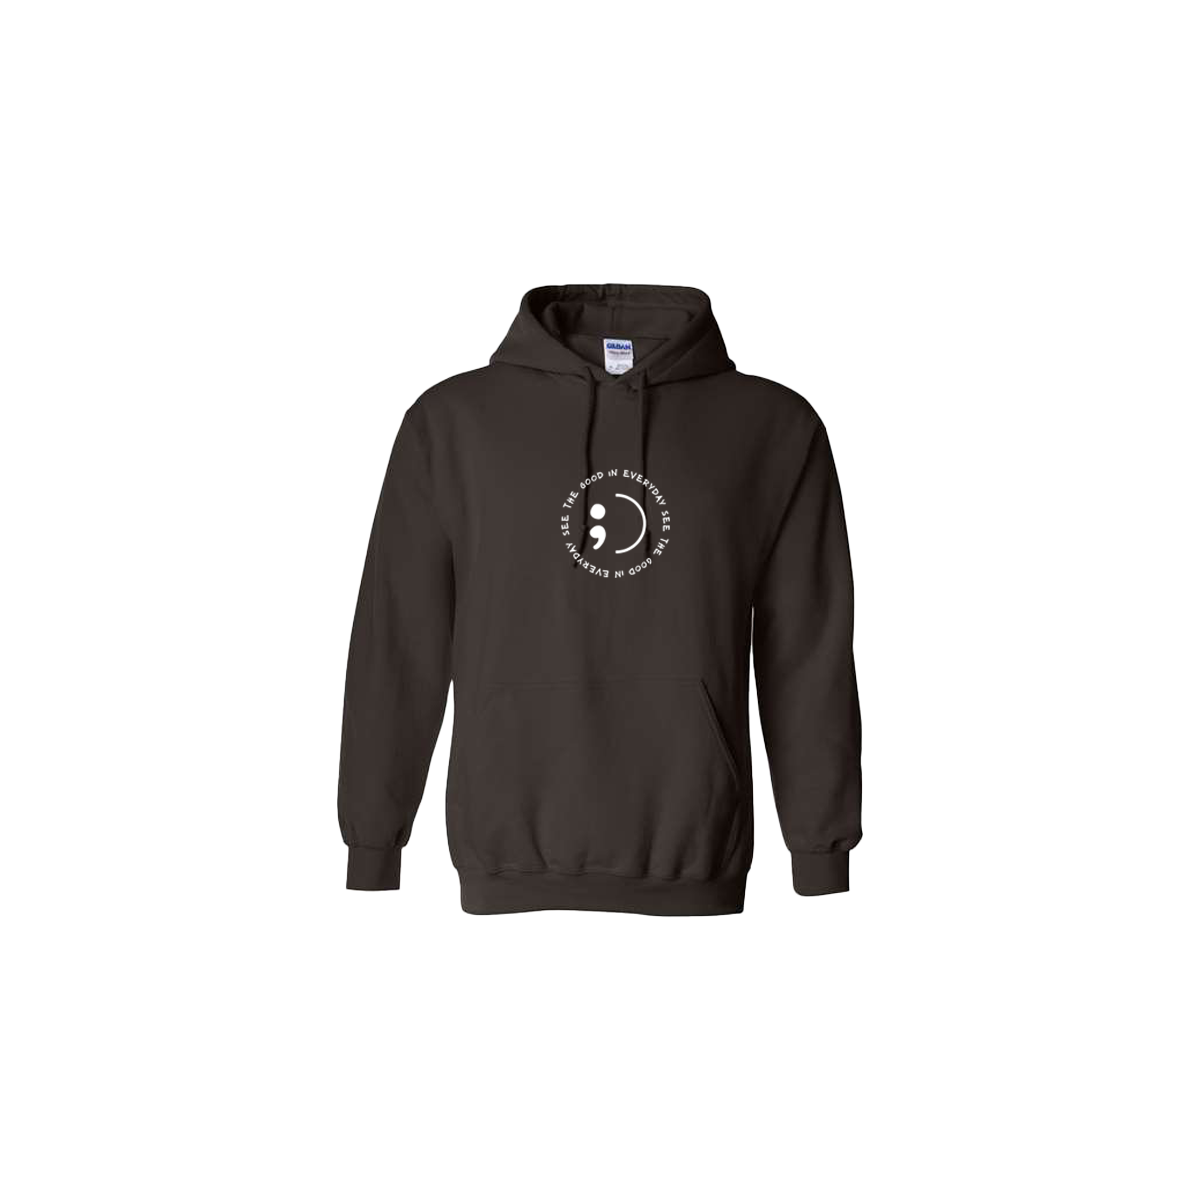 See the Good in Everyday Embroidered Brown Hoodie - Mental Health Awareness Clothing